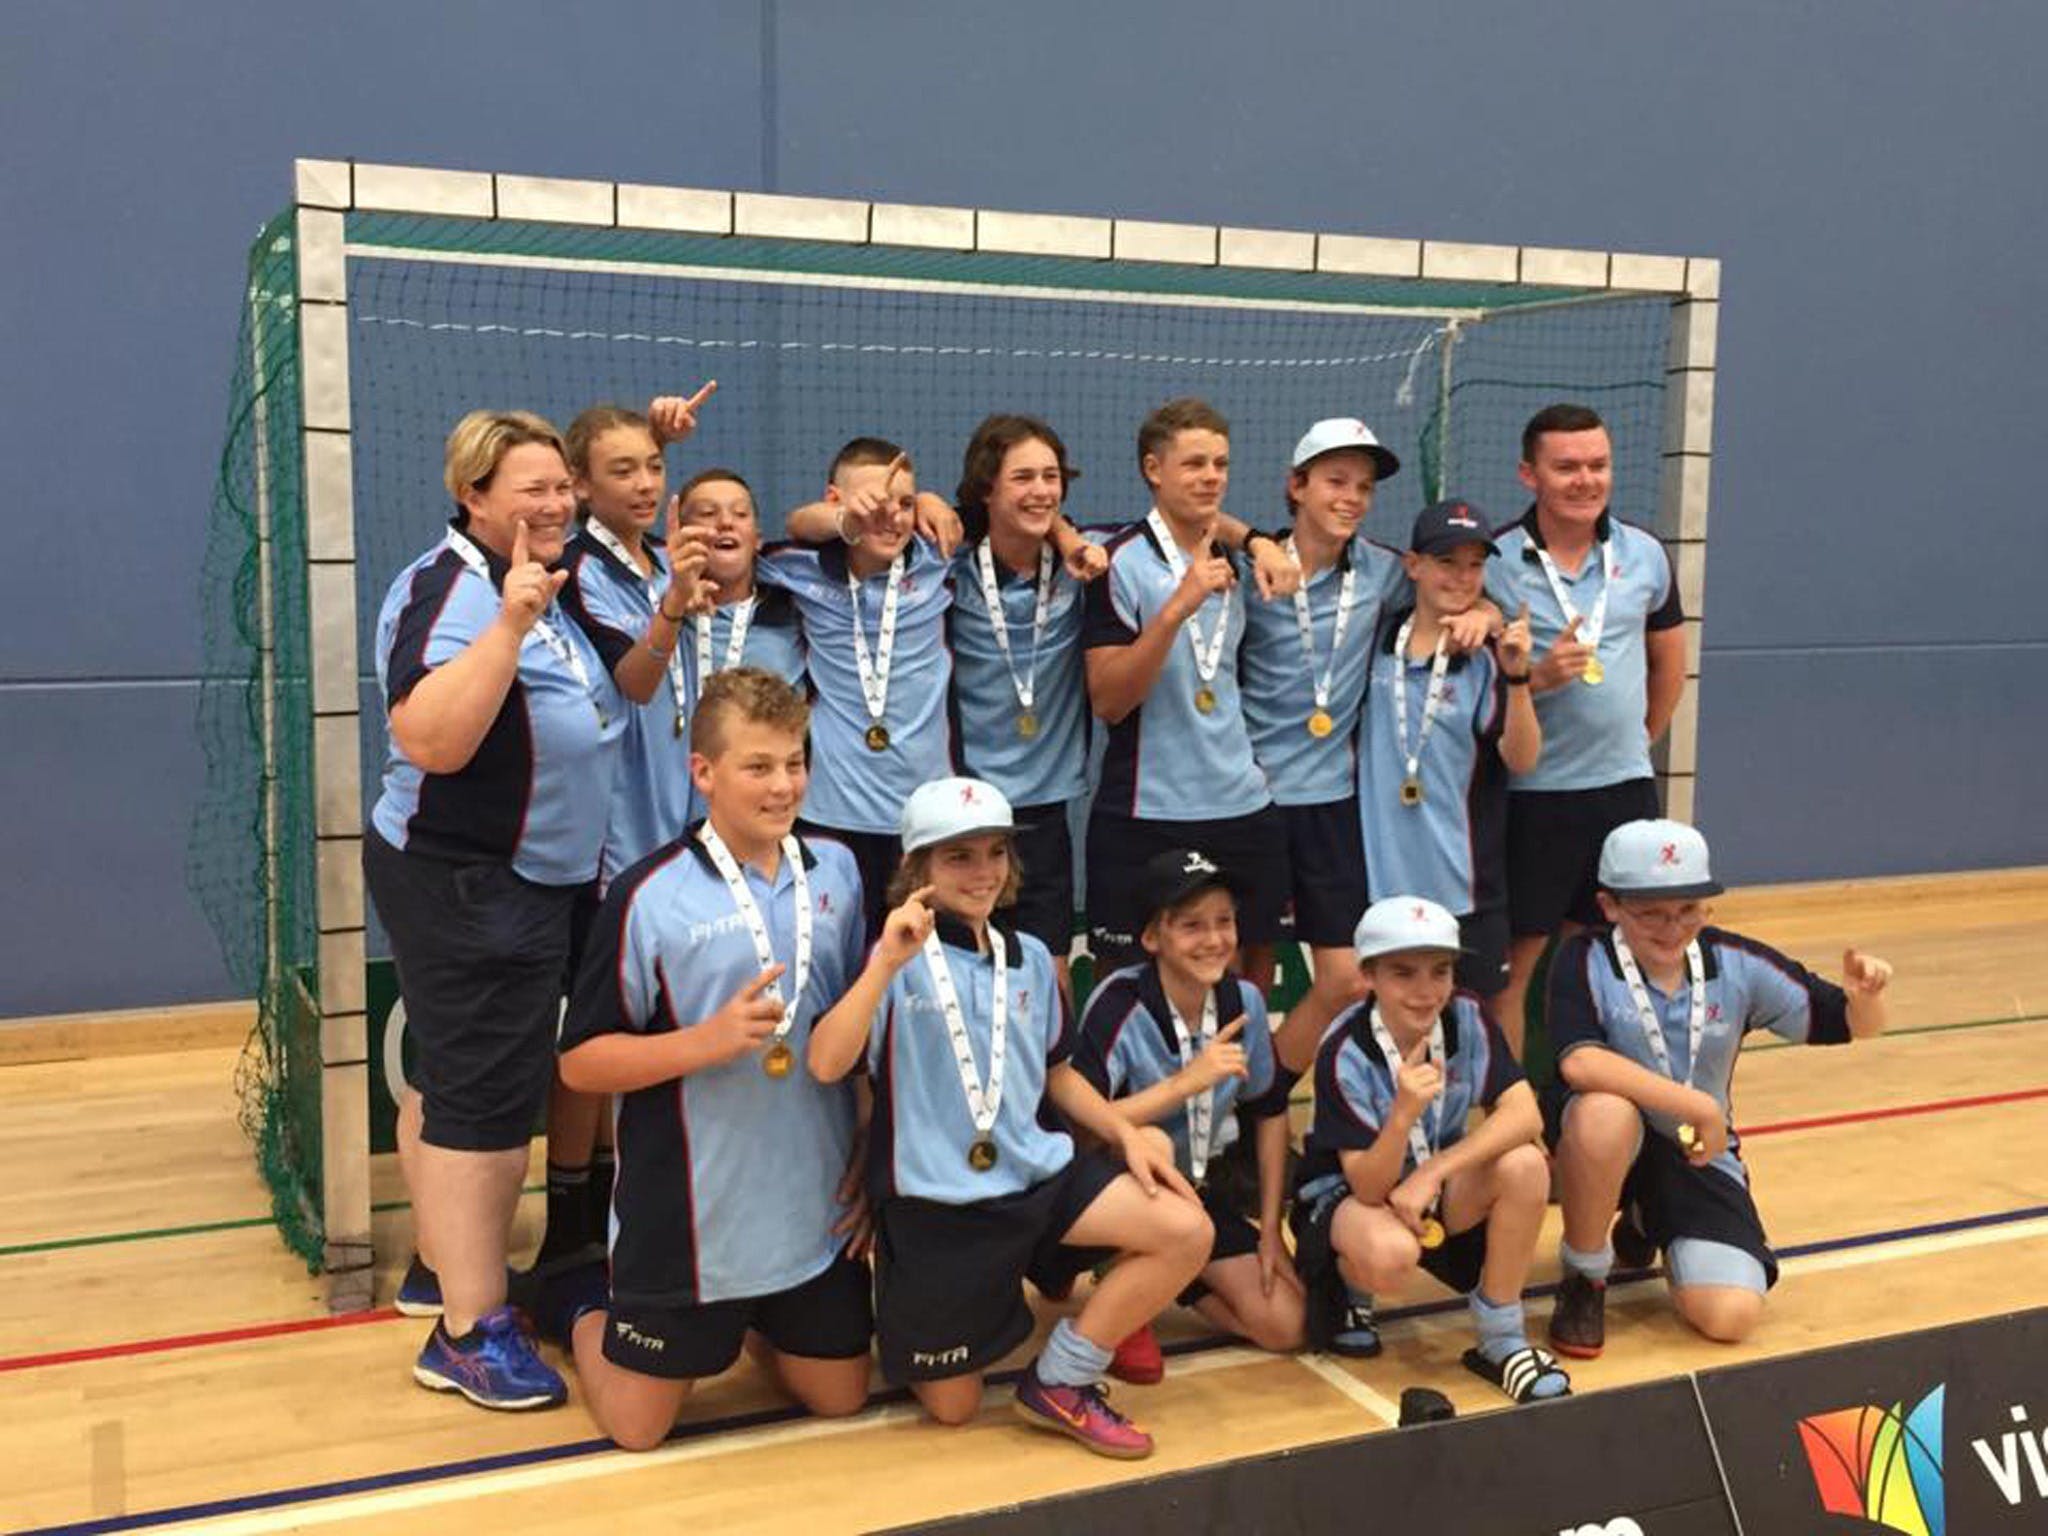 Hockey NSW Indoor State Championship  Under 18 Boys - Pubs and Clubs